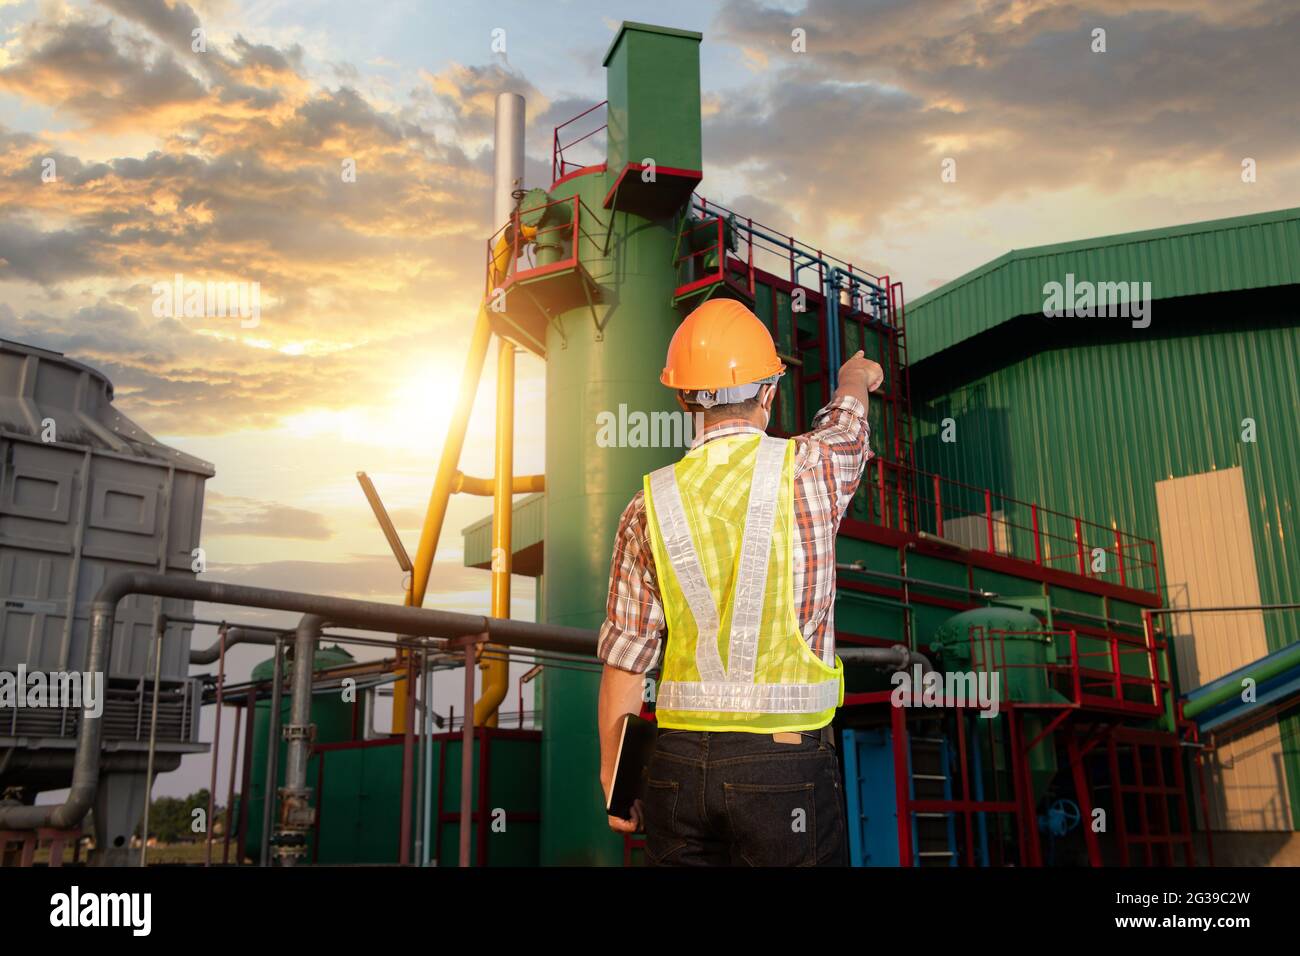 Engineers working in the power plant area Stock Photo